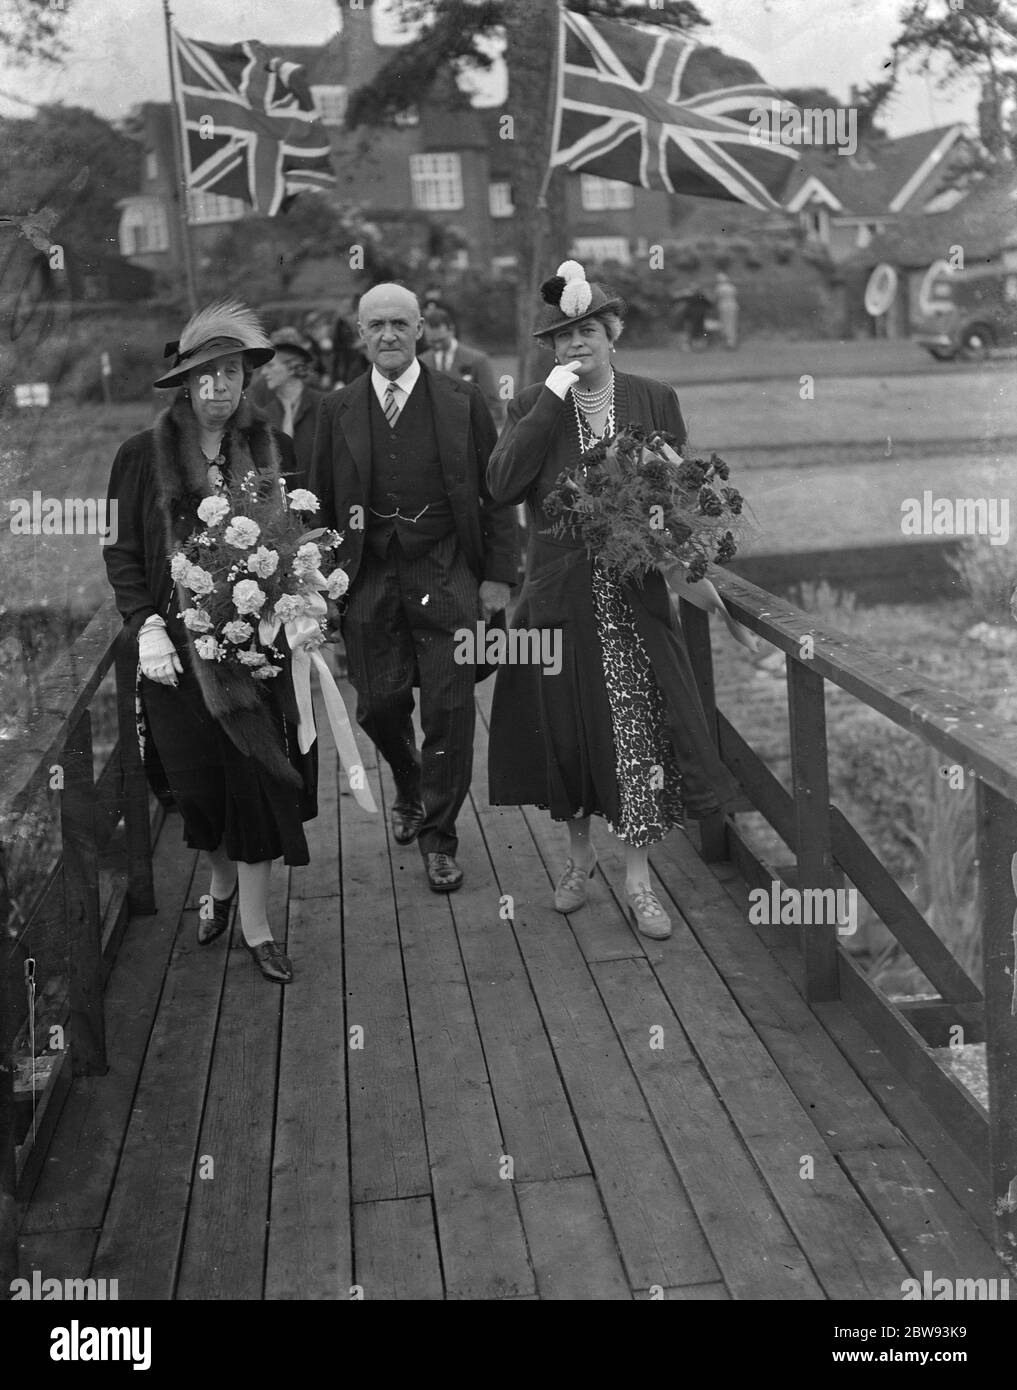 The charity Lifeboat fete in Scadbury , Kent . Lady Smithers , Sir Waldron Smithers and Mrs Marsham Townshends walking down a gangway . 1939 Stock Photo